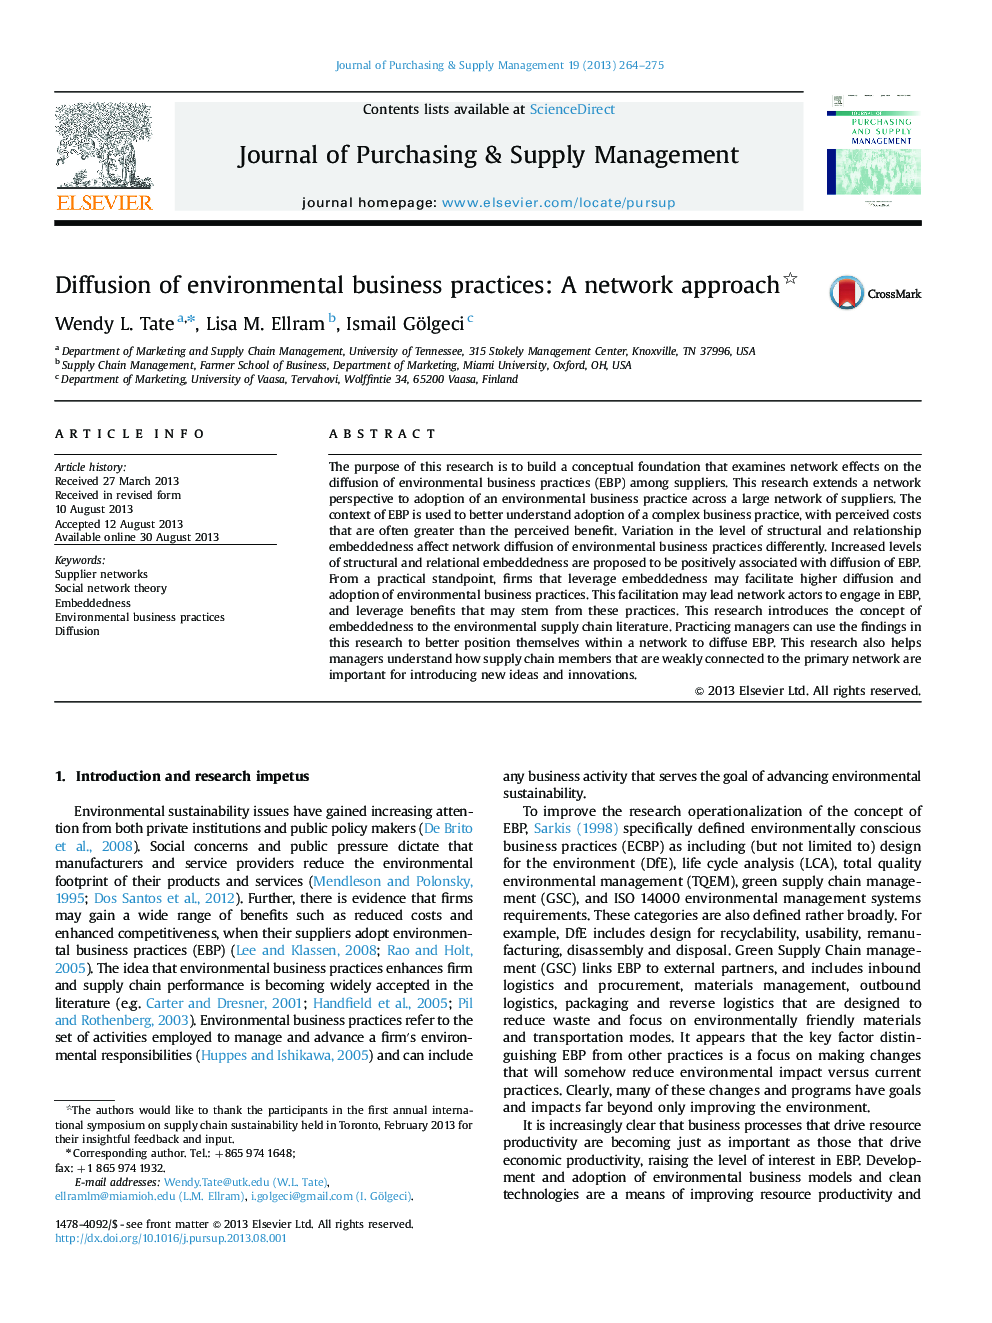 Diffusion of environmental business practices: A network approach 